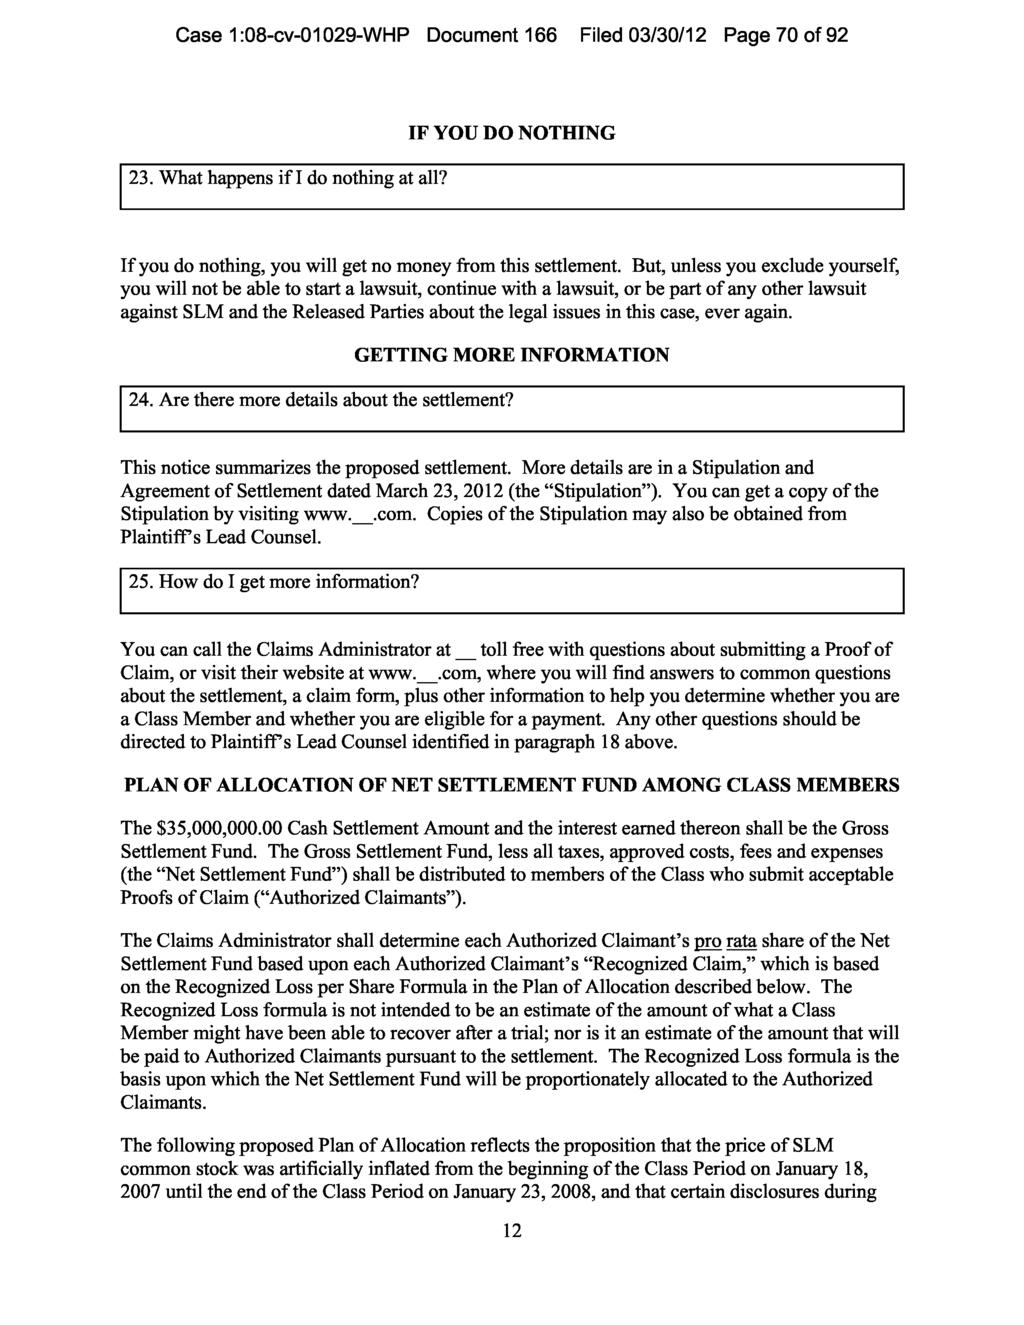 Case 1:08-cv-01029-WHP Document 166 Filed 03/30/12 Page 70 of 92 23. What happens if I do nothing at all? IF YOU DO NOTHING If you do nothing, you will get no money from this settlement.